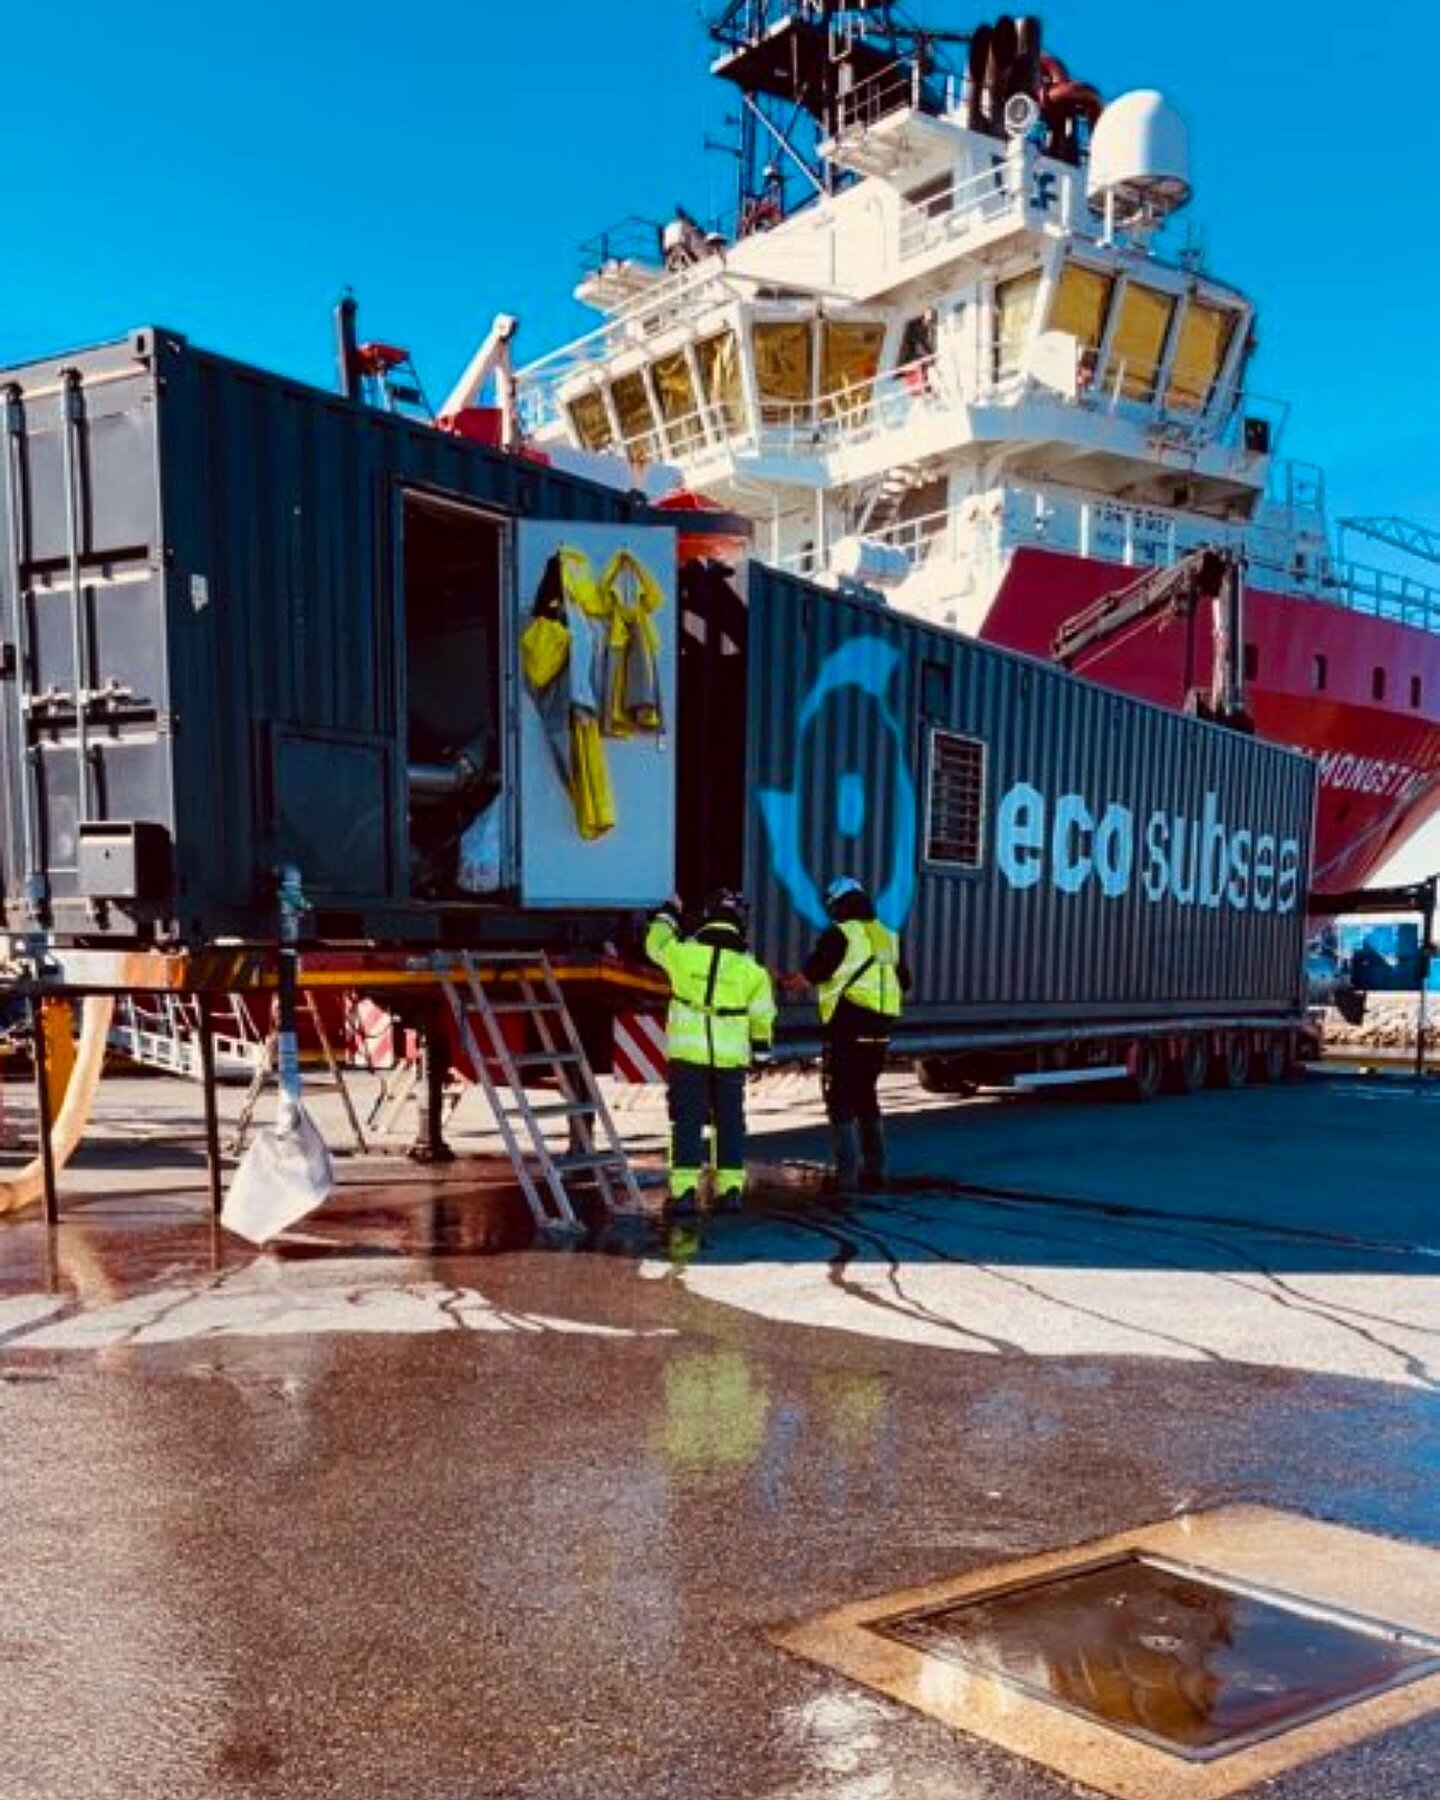 Cleaning Scandi Mongstad today✅🌱☀️ @dofgroup 
A beautiful day in #bergen serving customers that value sustainable solutions, fuel-savings and full biofouling collection.
Photocred: John Inge Flem 📸

#hullcleaning #sustainable #shipping #maritime #b